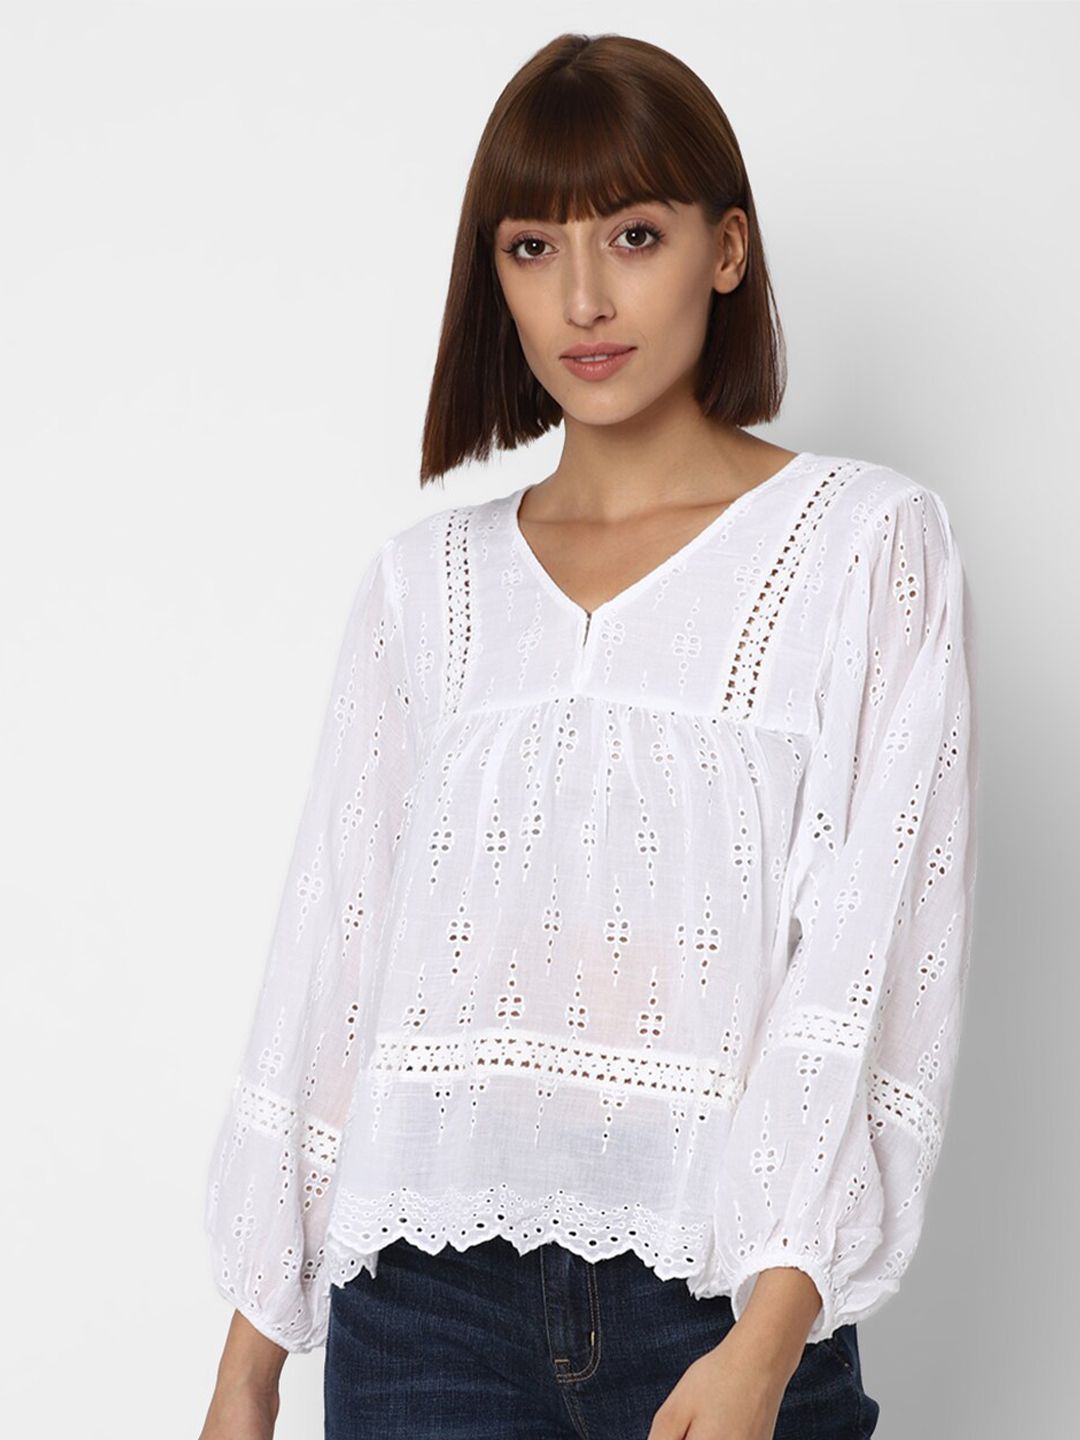 AMERICAN EAGLE OUTFITTERS White Self Design Regular Top Price in India